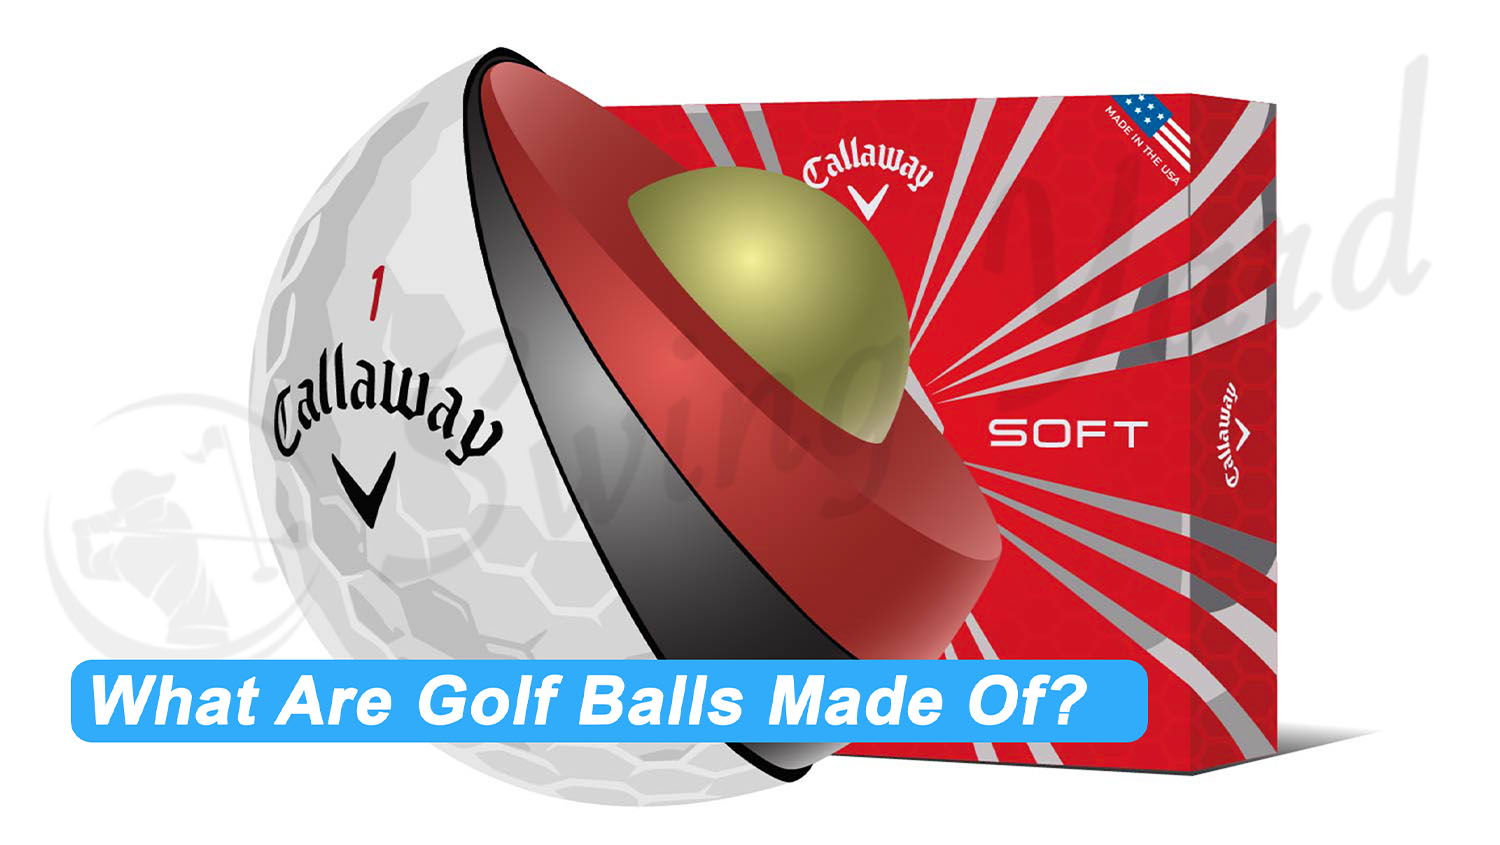 Cut section illustration showing what a golf ball is made of